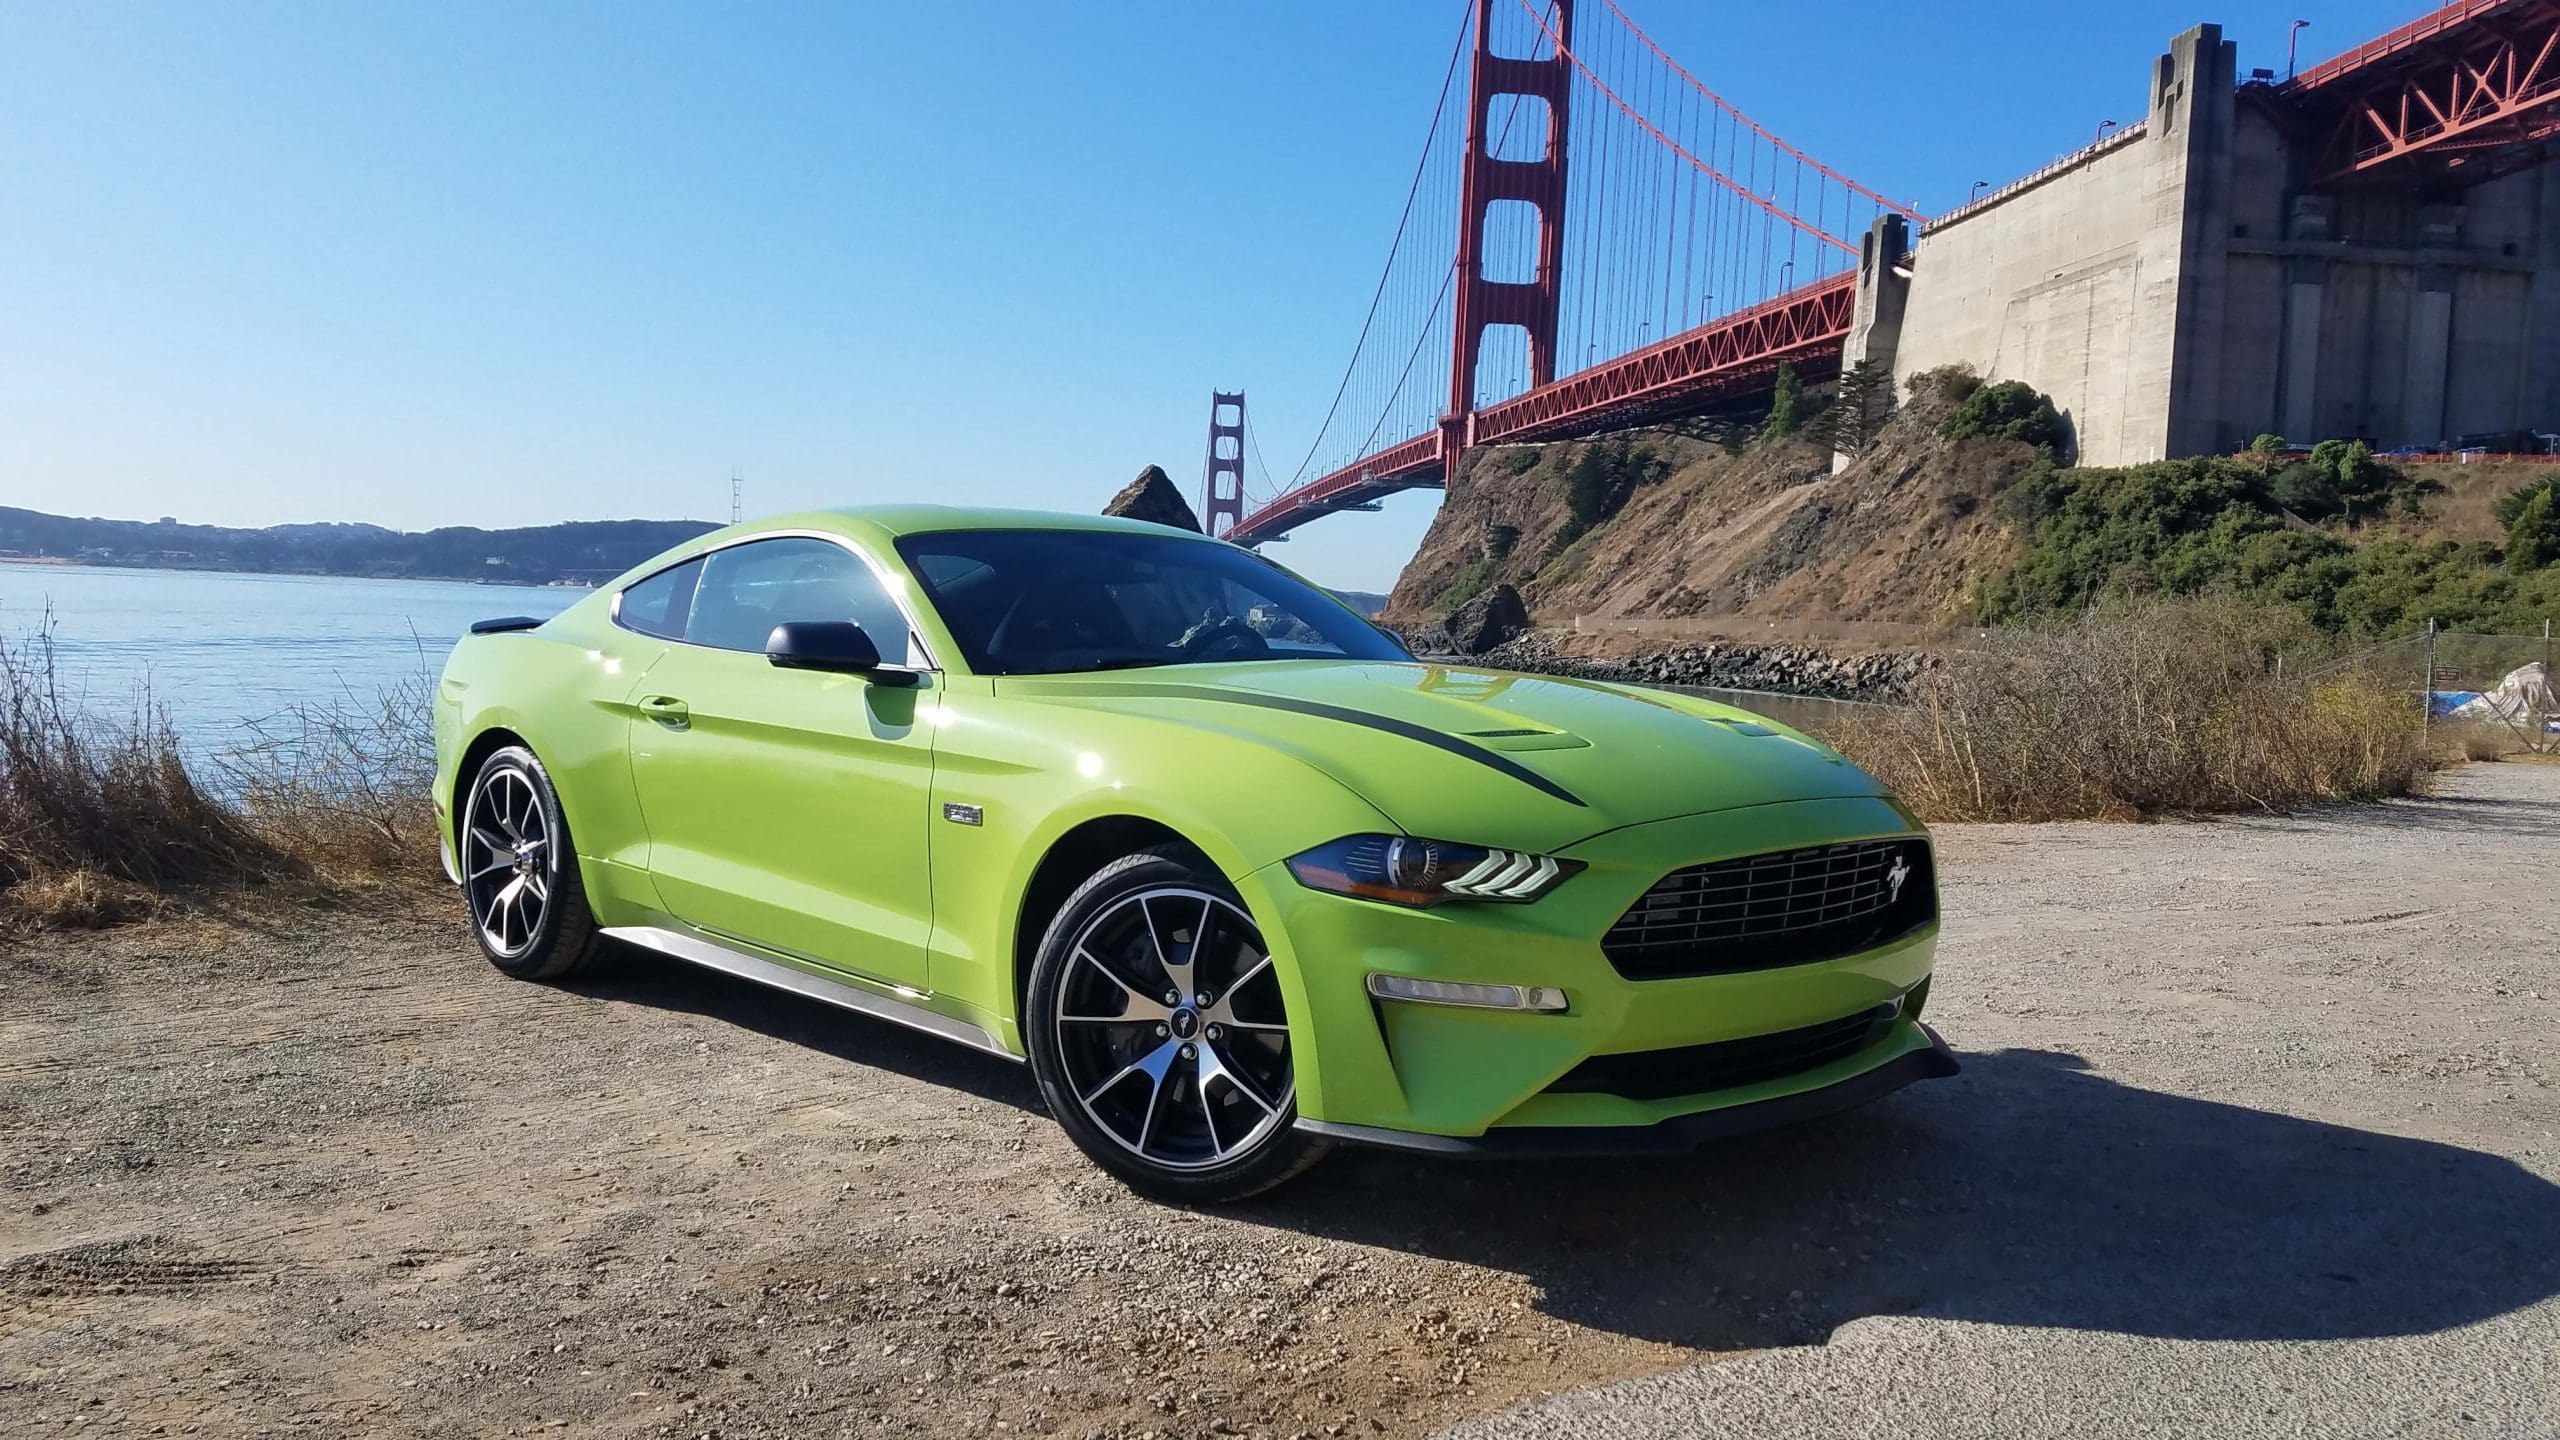 Mustang Of The Day: 2020 Ford Mustang EcoBoost High Performance